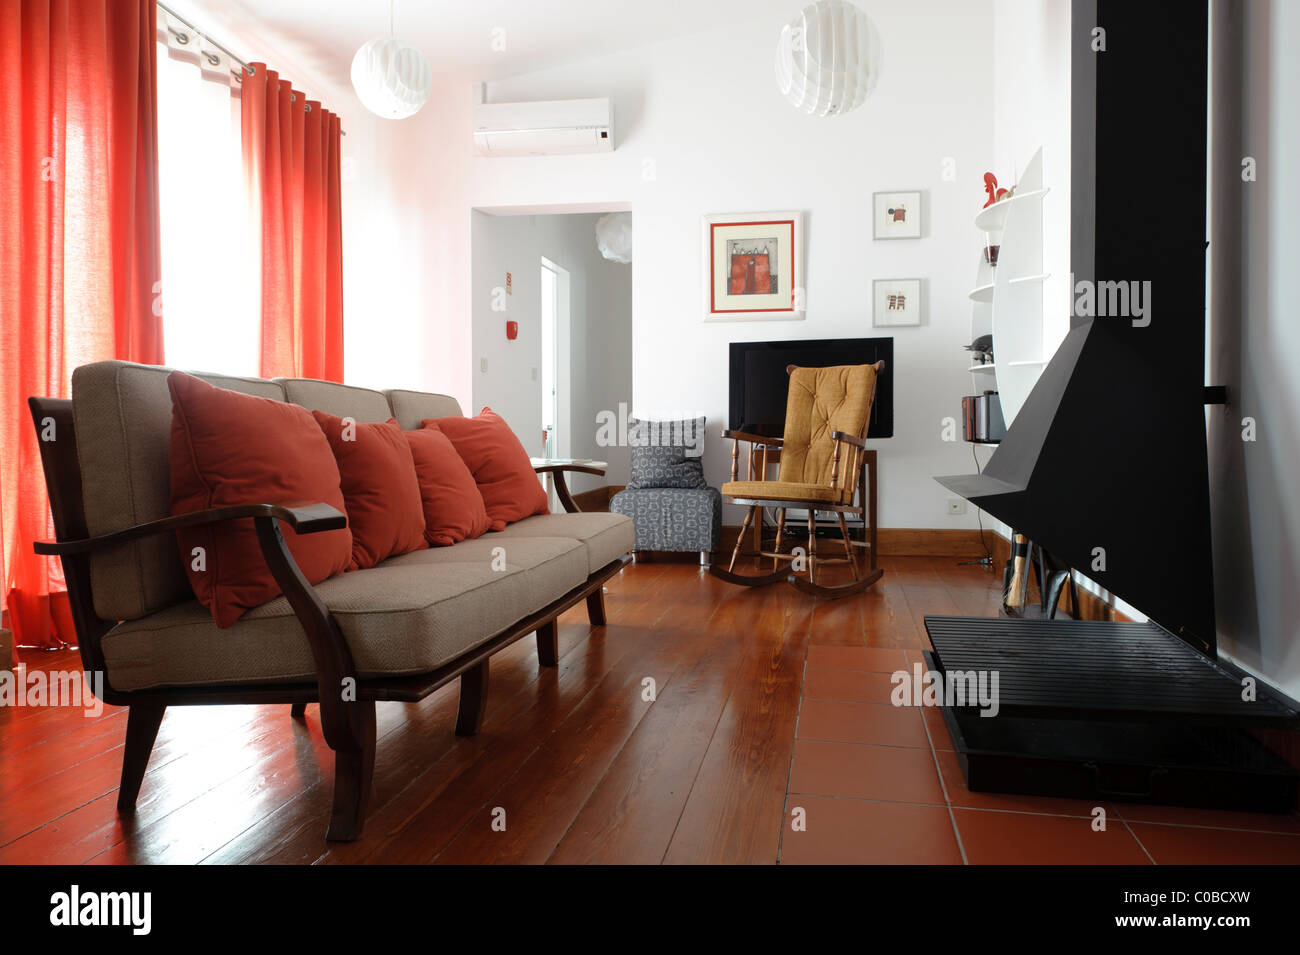 Living room with sofa and fireplace Stock Photo